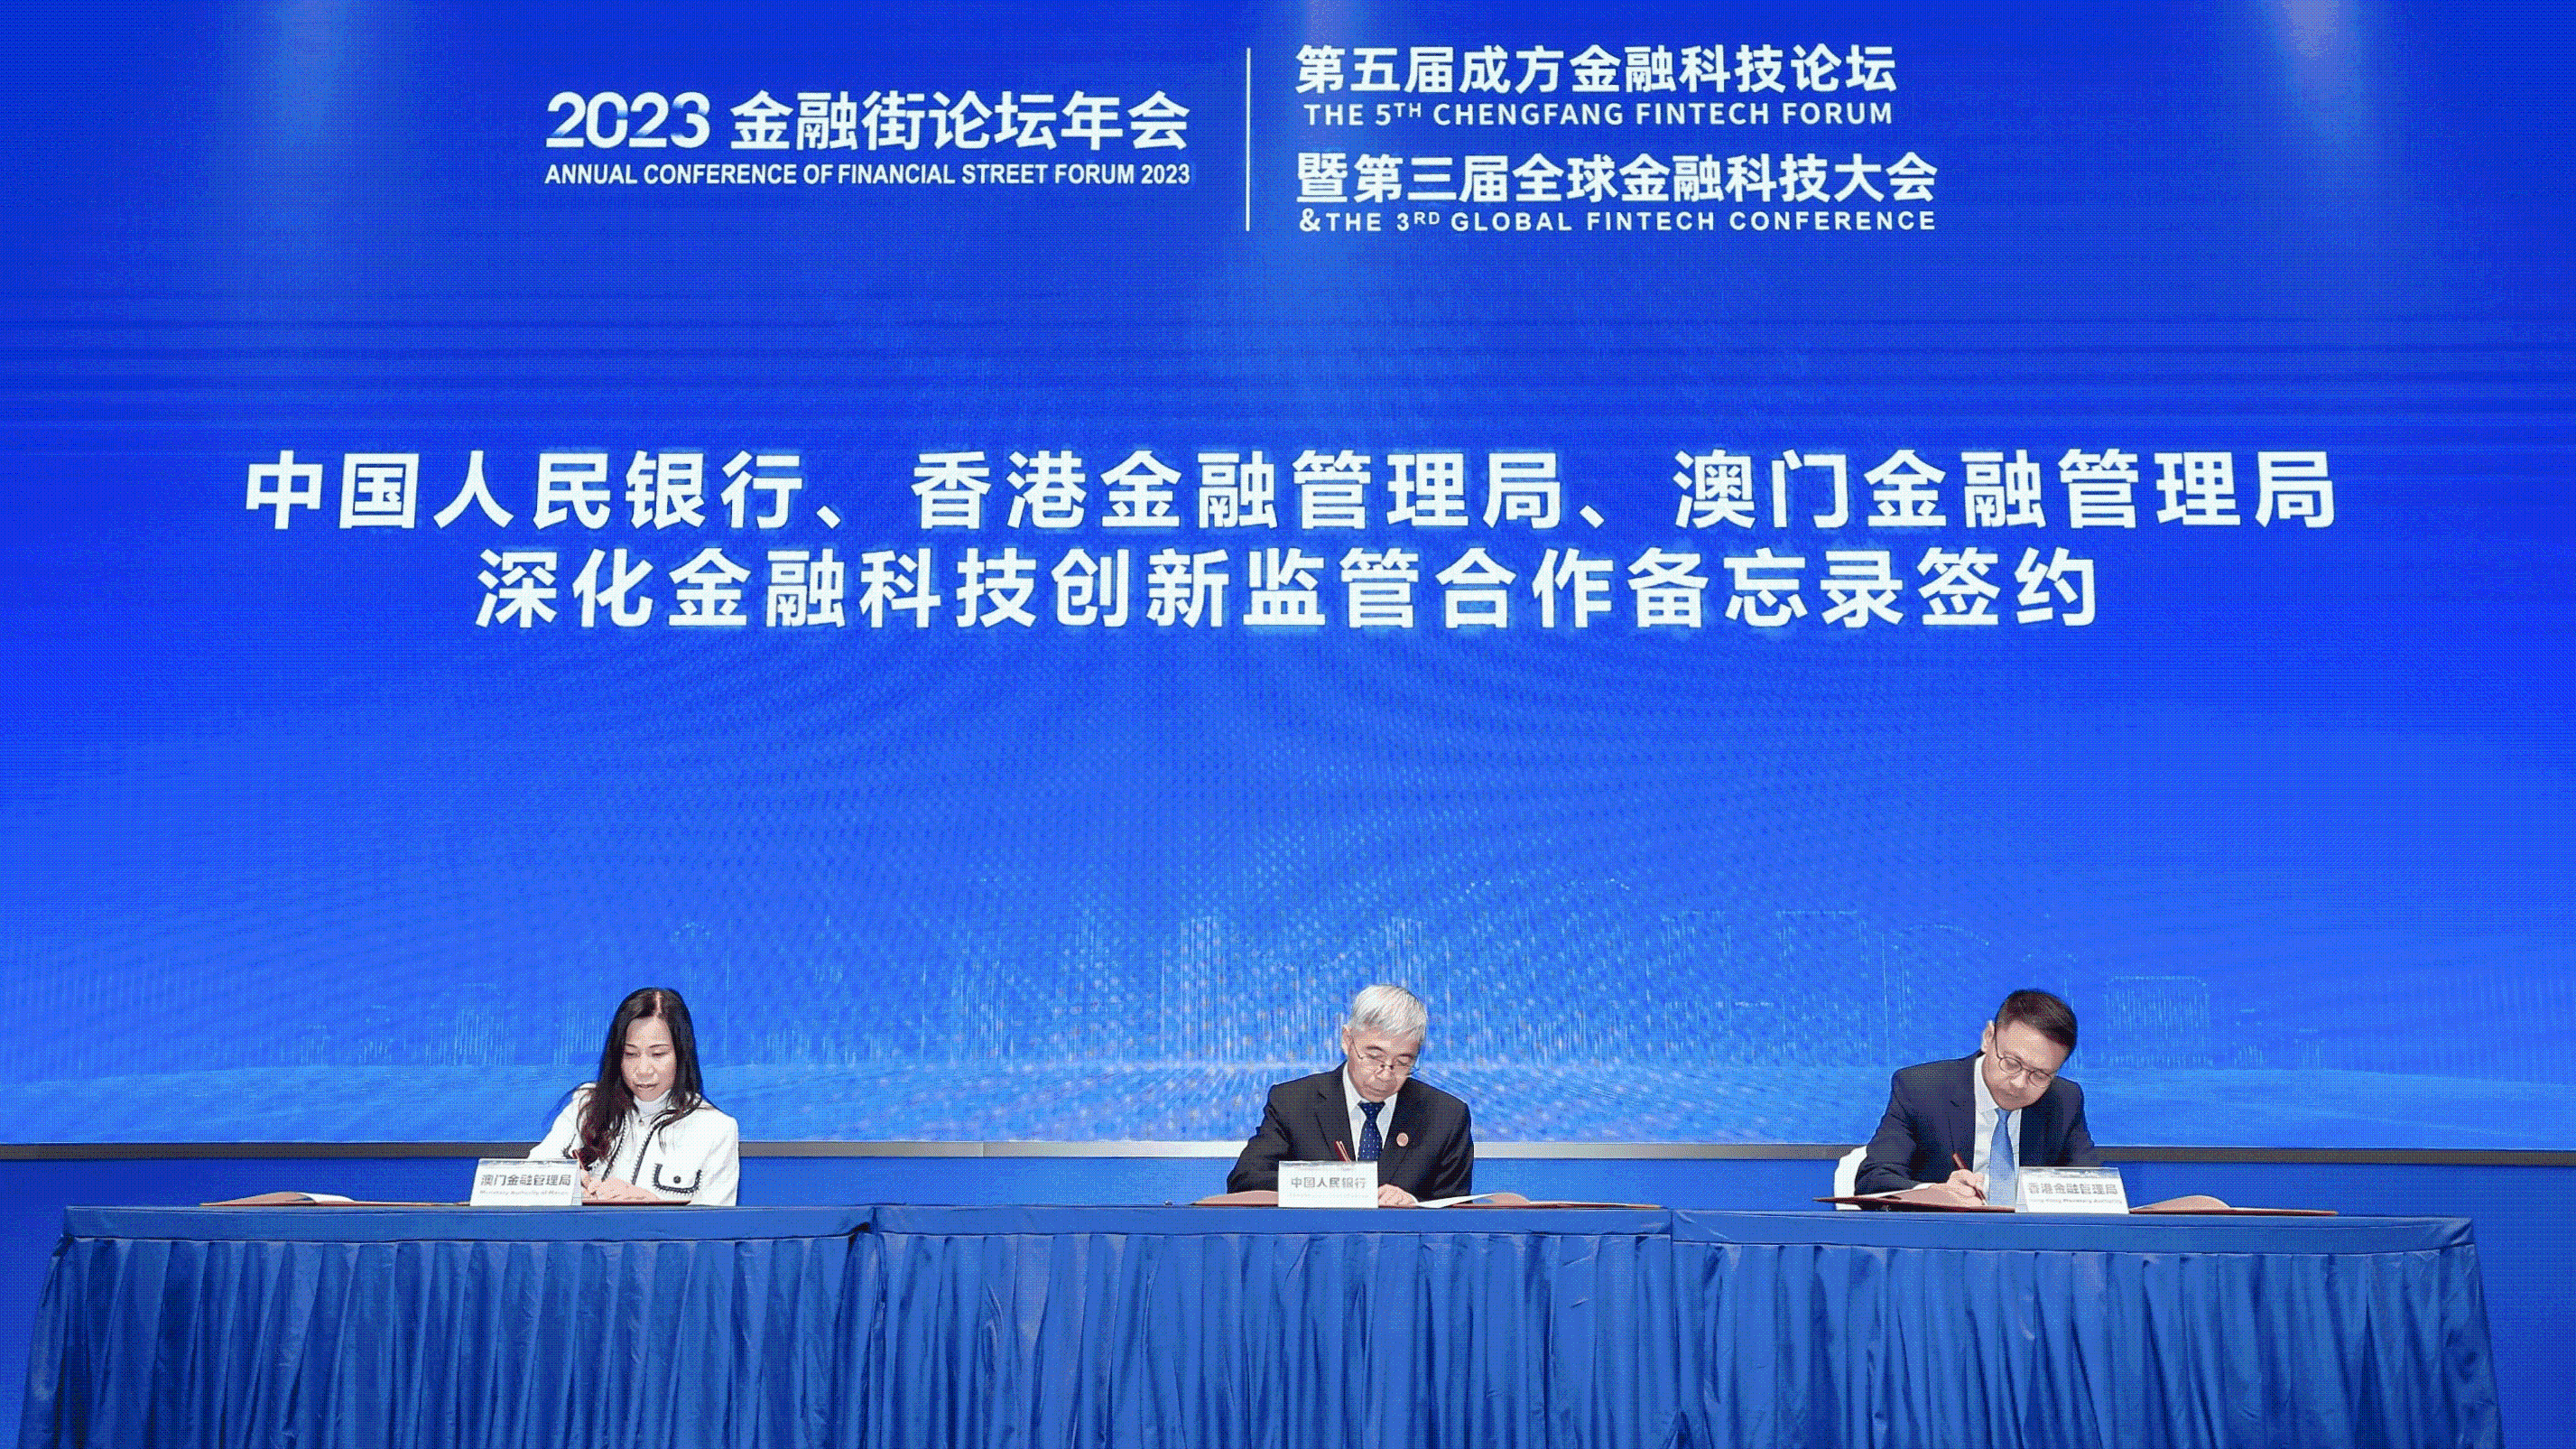 The Hong Kong Monetary Authority (HKMA), the People's Bank of China (PBoC) and the Monetary Authority of Macao (AMCM) jointly issued a press release today (November 9) announcing that the three authorities had signed the "Memorandum of Understanding on Deepening Fintech Innovation Supervisory Cooperation in the Guangdong-Hong Kong-Macao Greater Bay Area". The Deputy Governor of the PBoC, Mr Zhang Qingsong (centre); the Executive Director (Banking Supervision) of the HKMA, Mr Raymond Chan (right), and the Executive Director of the AMCM, Ms Henrietta Lau (left), sign the Memorandum of Understanding at the ChengFang Fintech Forum in Beijing on November 8.